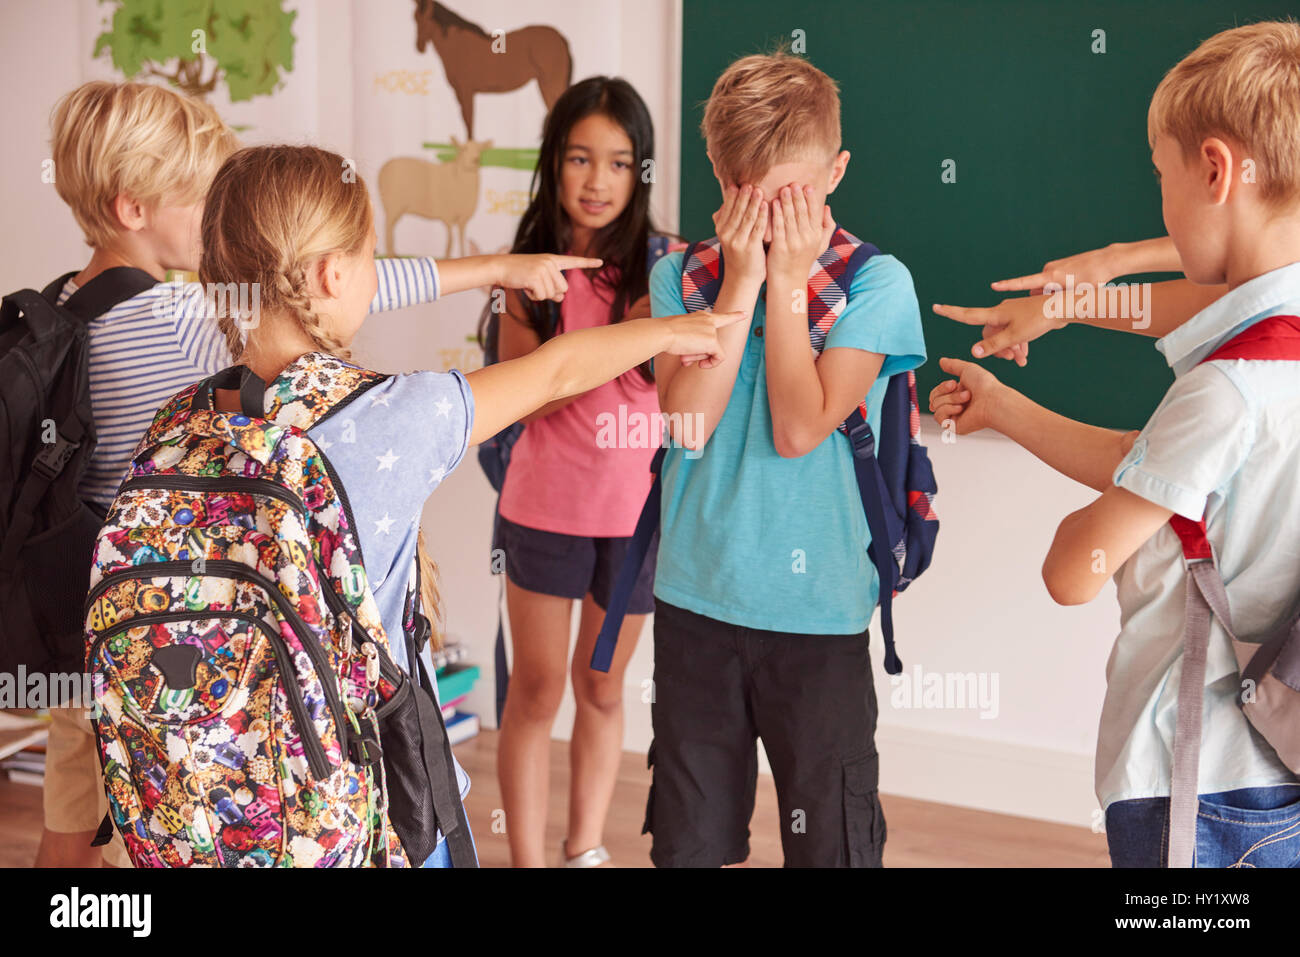 Kids laughing at their classmate Stock Photo